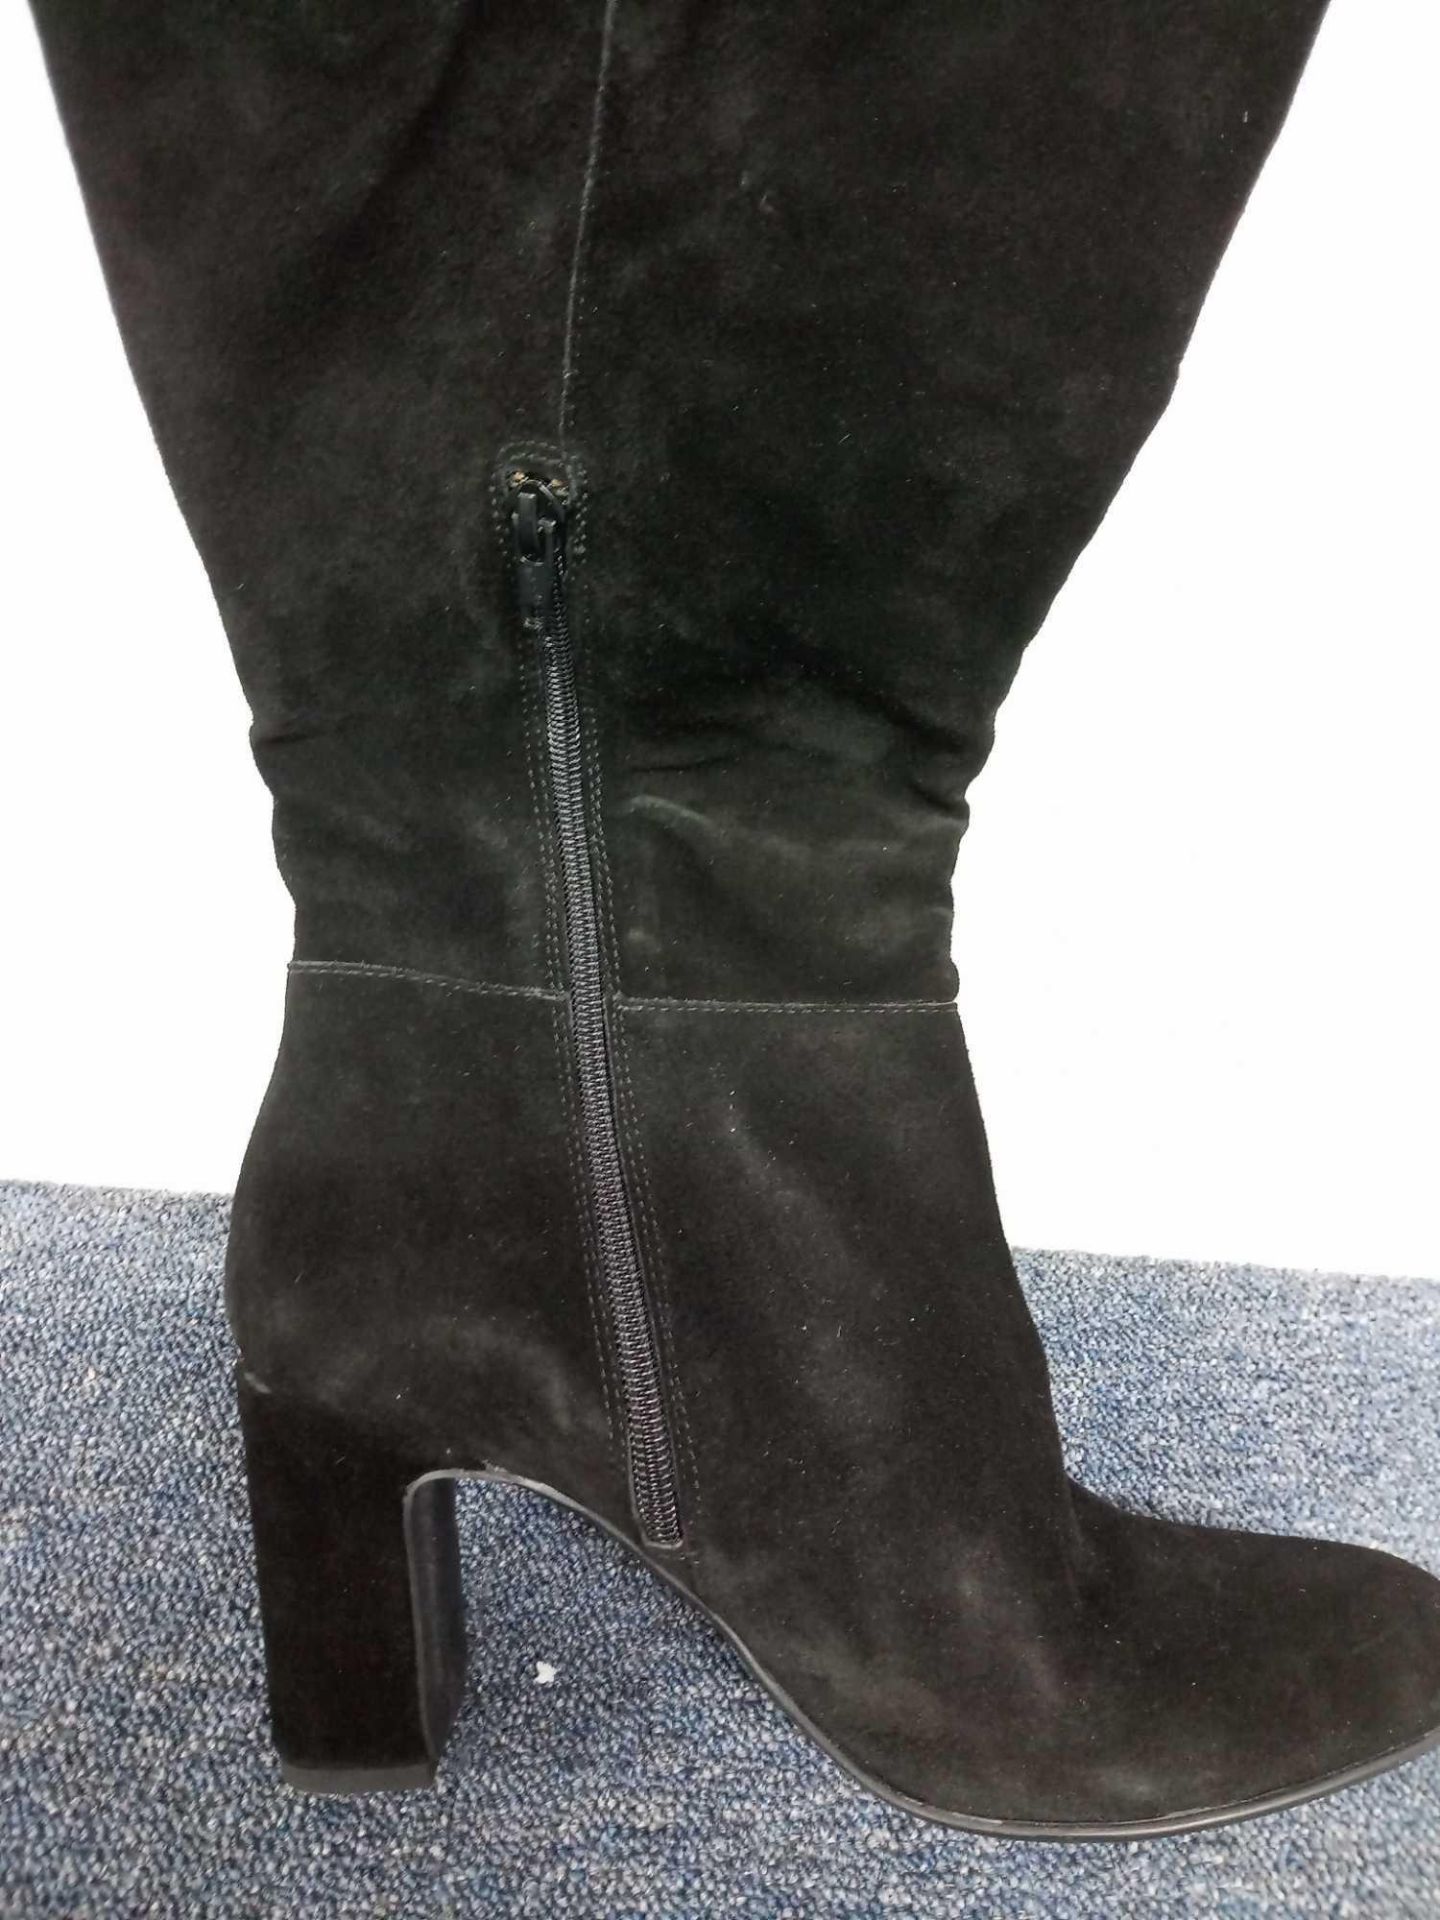 RRP £85 John Lewis Black Suede October Boots Size 6 (00095215) - Image 2 of 2